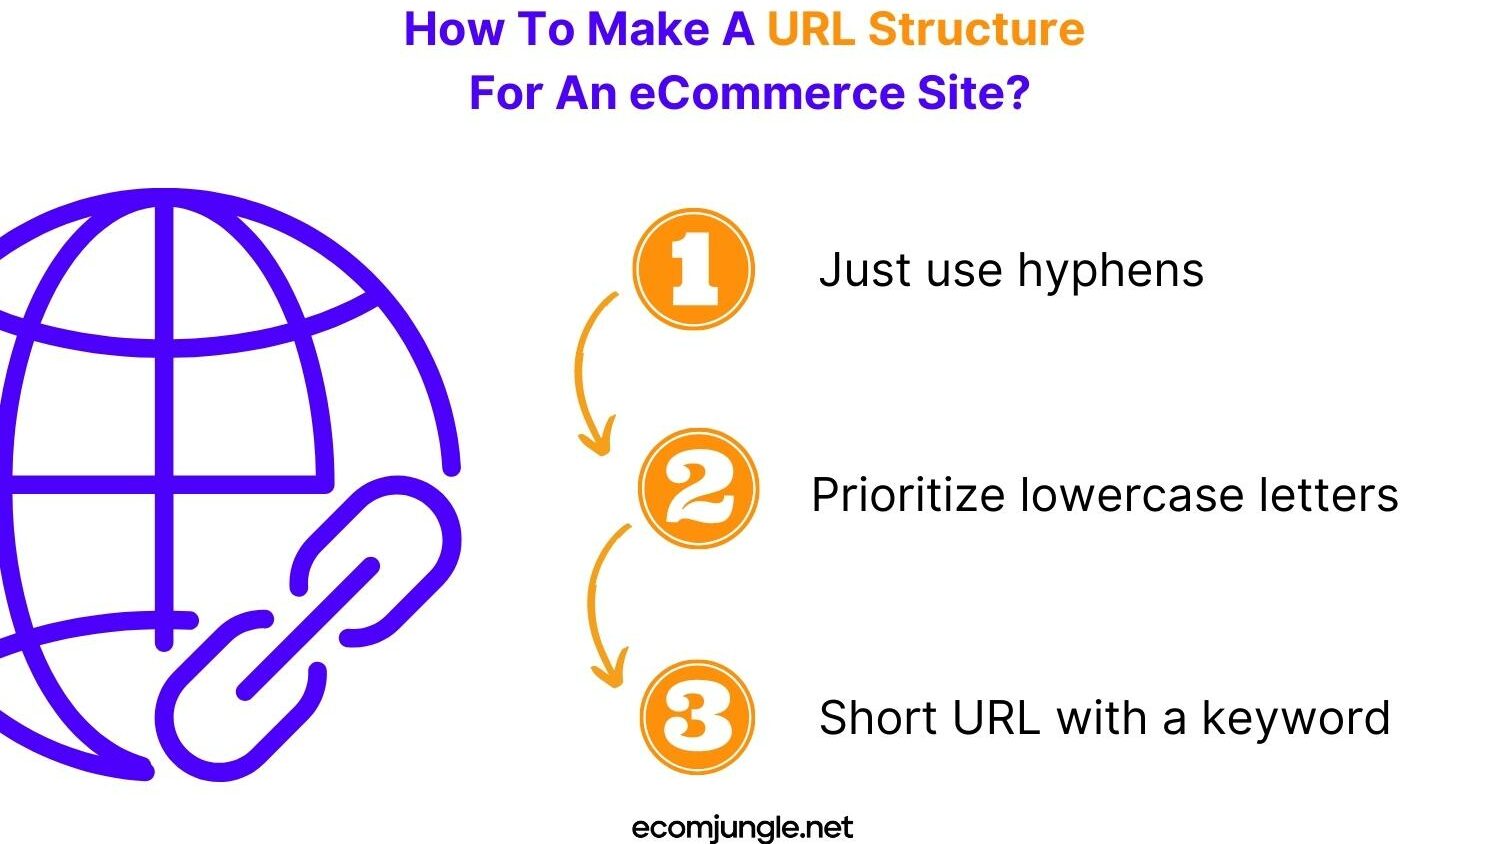 Follow three simple steps to create url structure for website, for example, create short rul with keywords of your business and product.